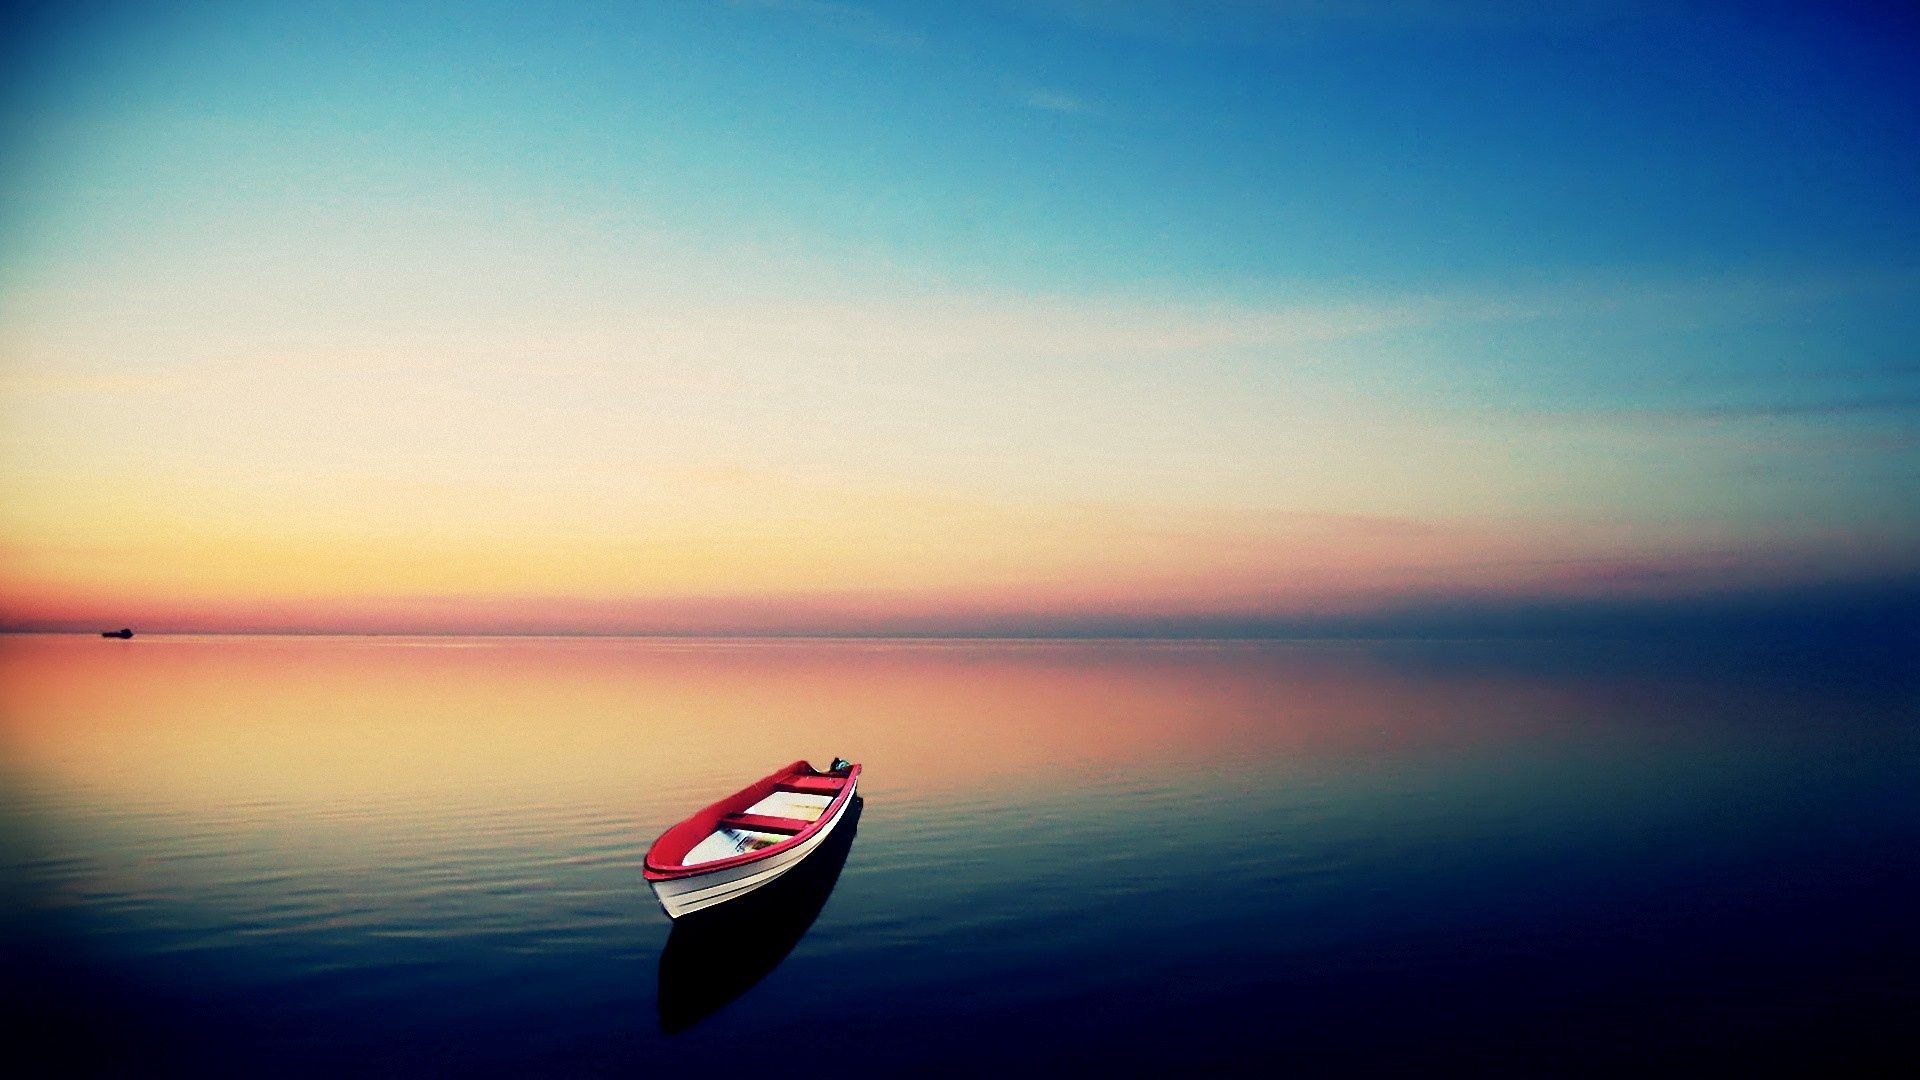 boat, sea, sunset, nature, horizon, water surface, evening, loneliness